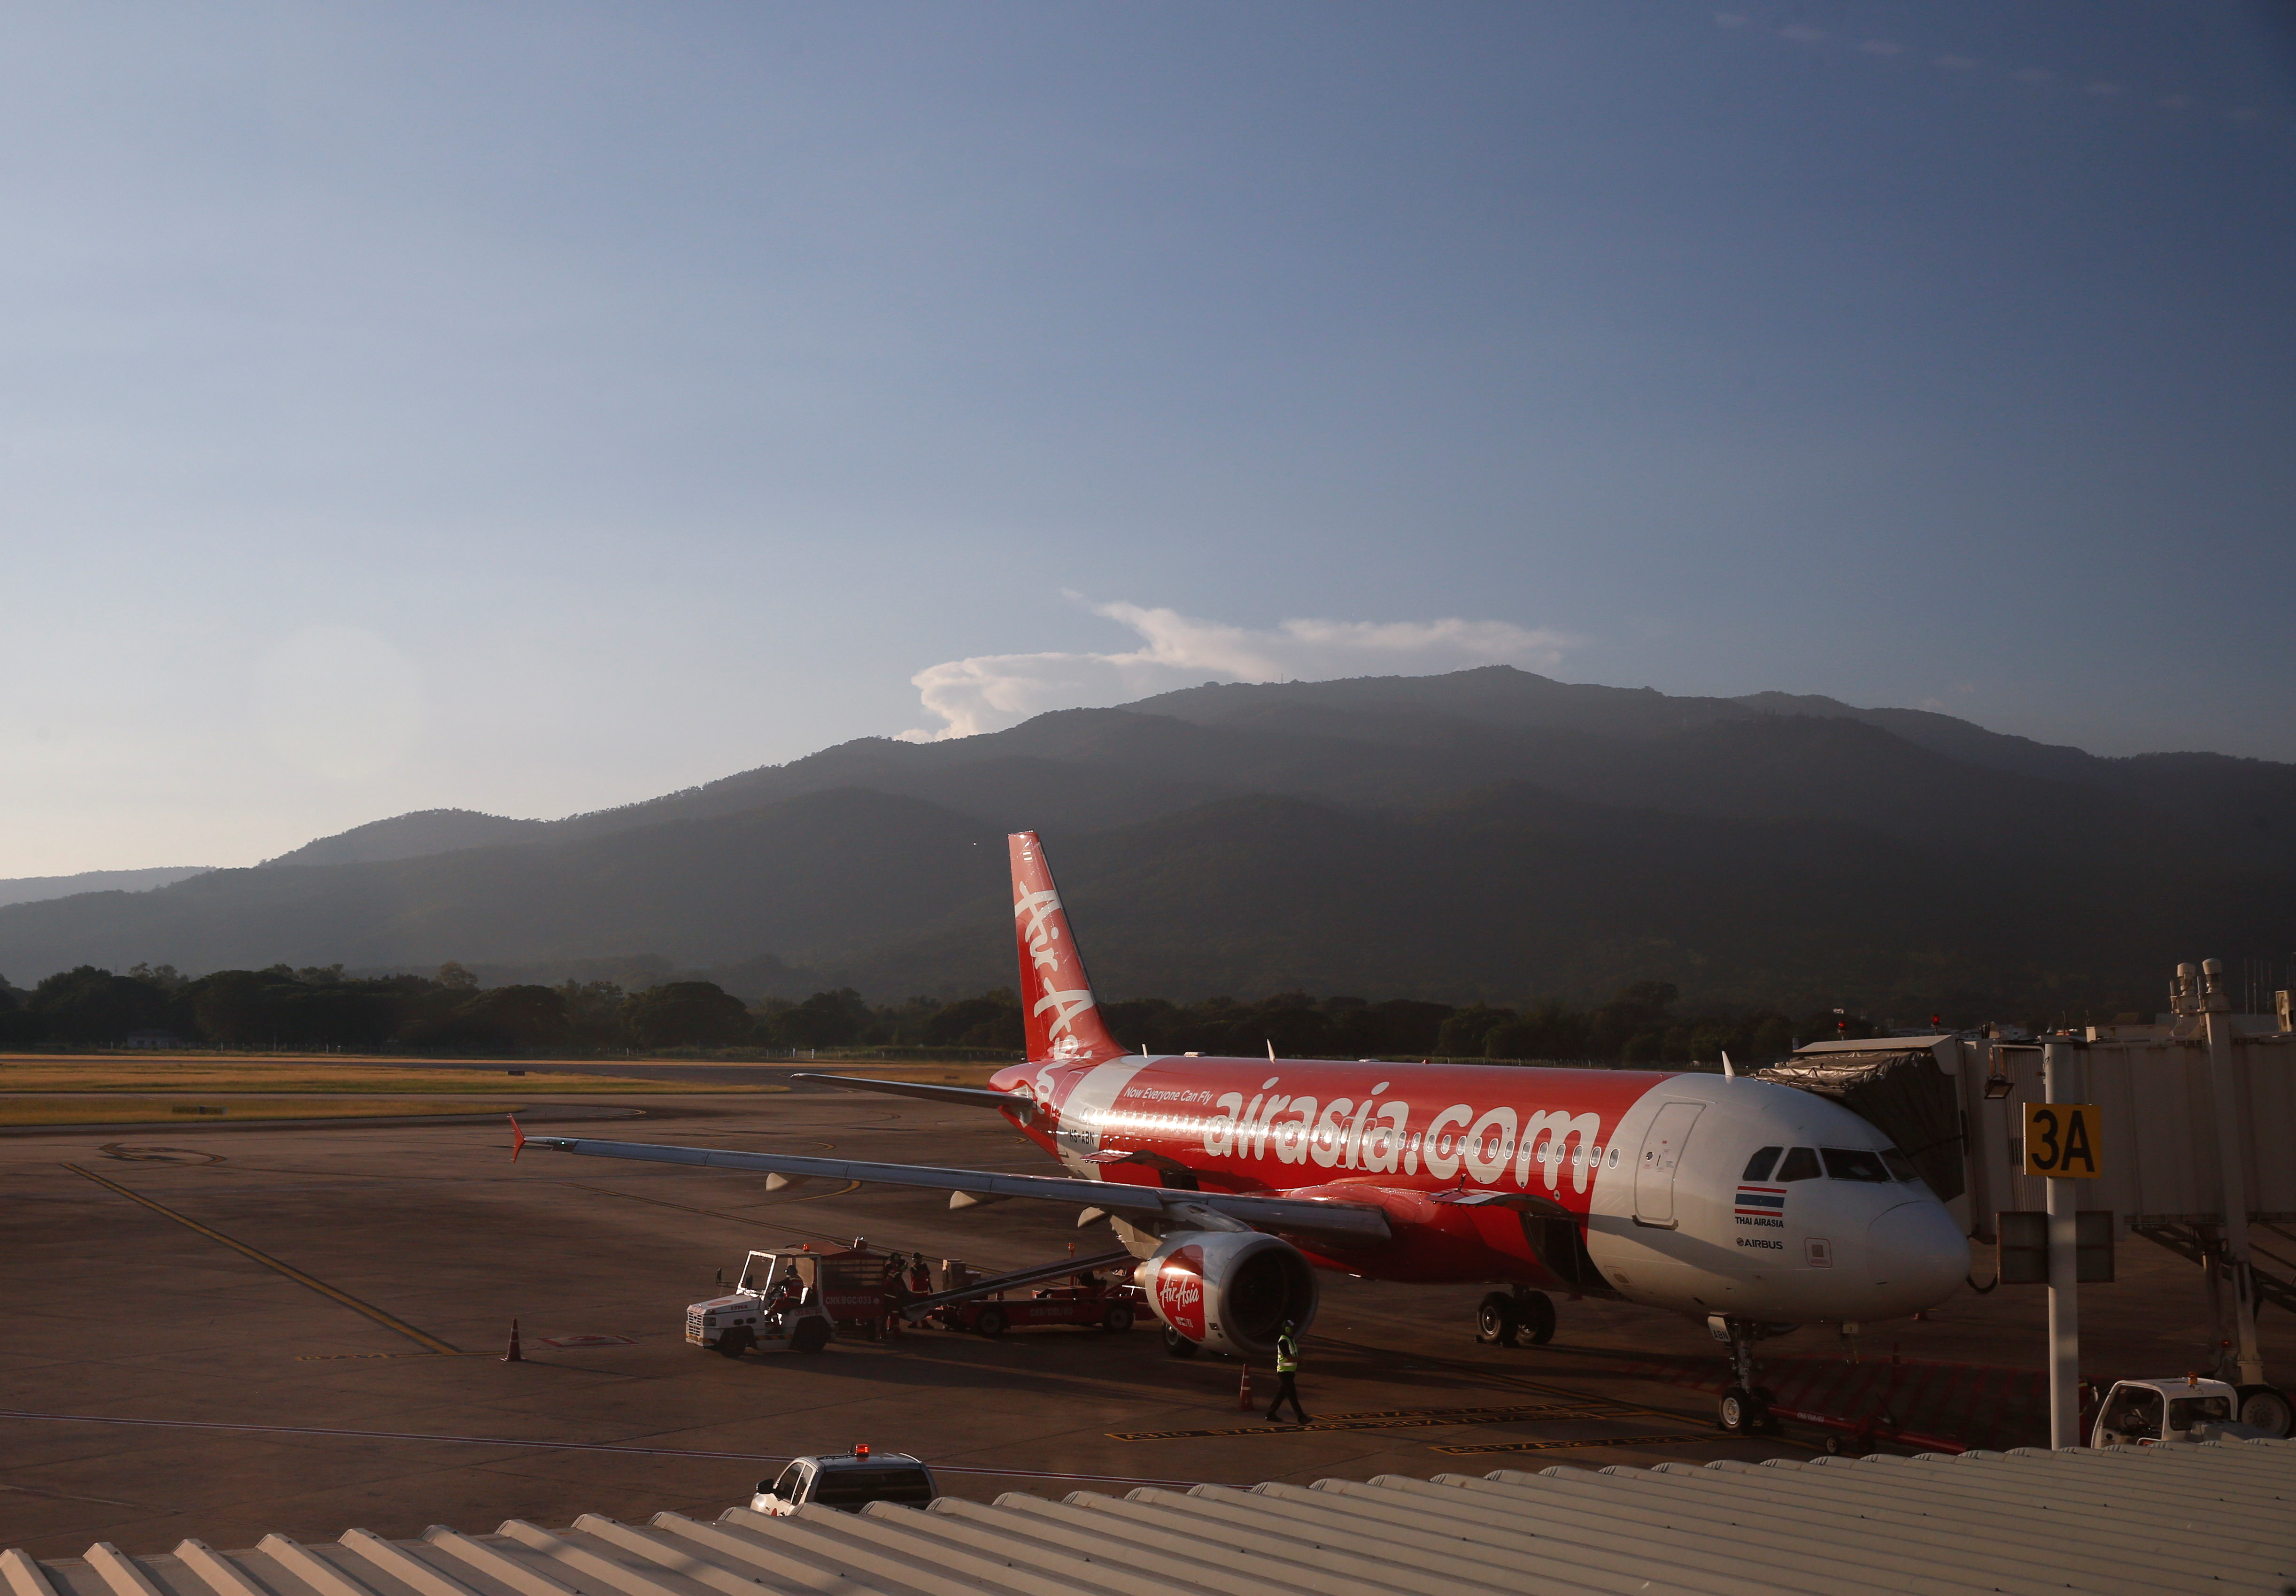 An AirAsia airplane is seen at the airport of popular tourist destination Chiang Mai, as the country reopens its borders to vaccinated tourists in Bangkok, Thailand November 16, 2021. Picture taken on November 16, 2021. REUTERS/Soe Zeya Tun